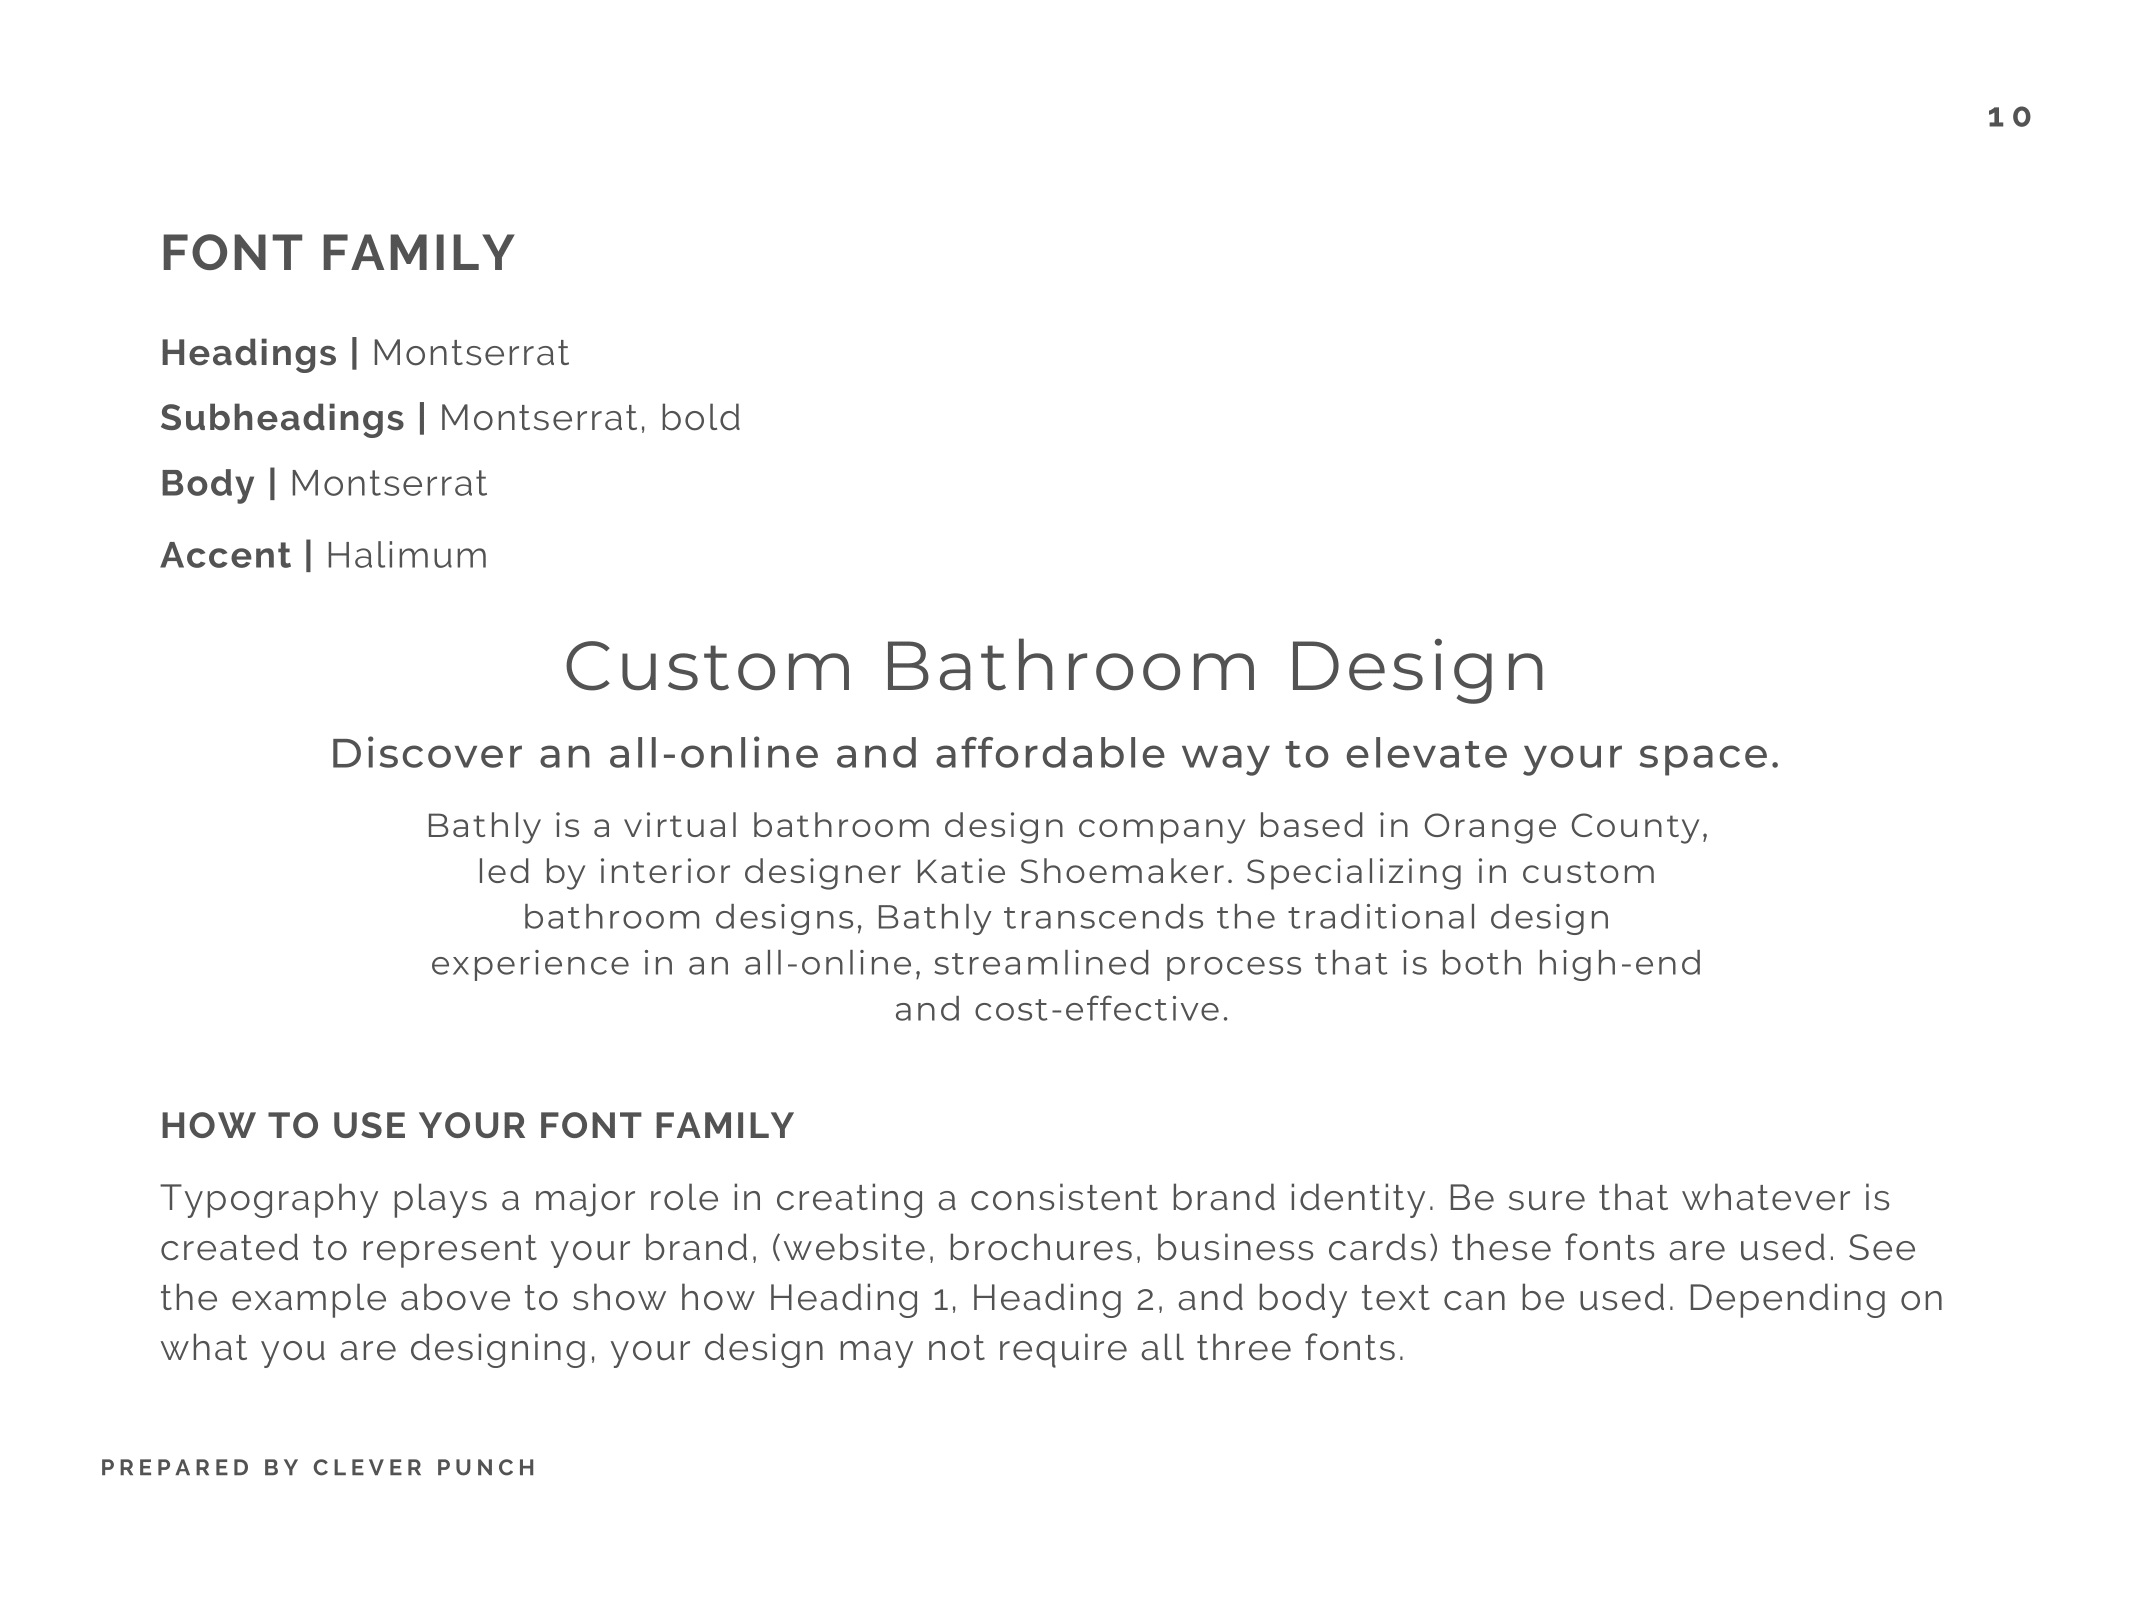 FINAL (updated) - Bathly Brand Guideline-11.png